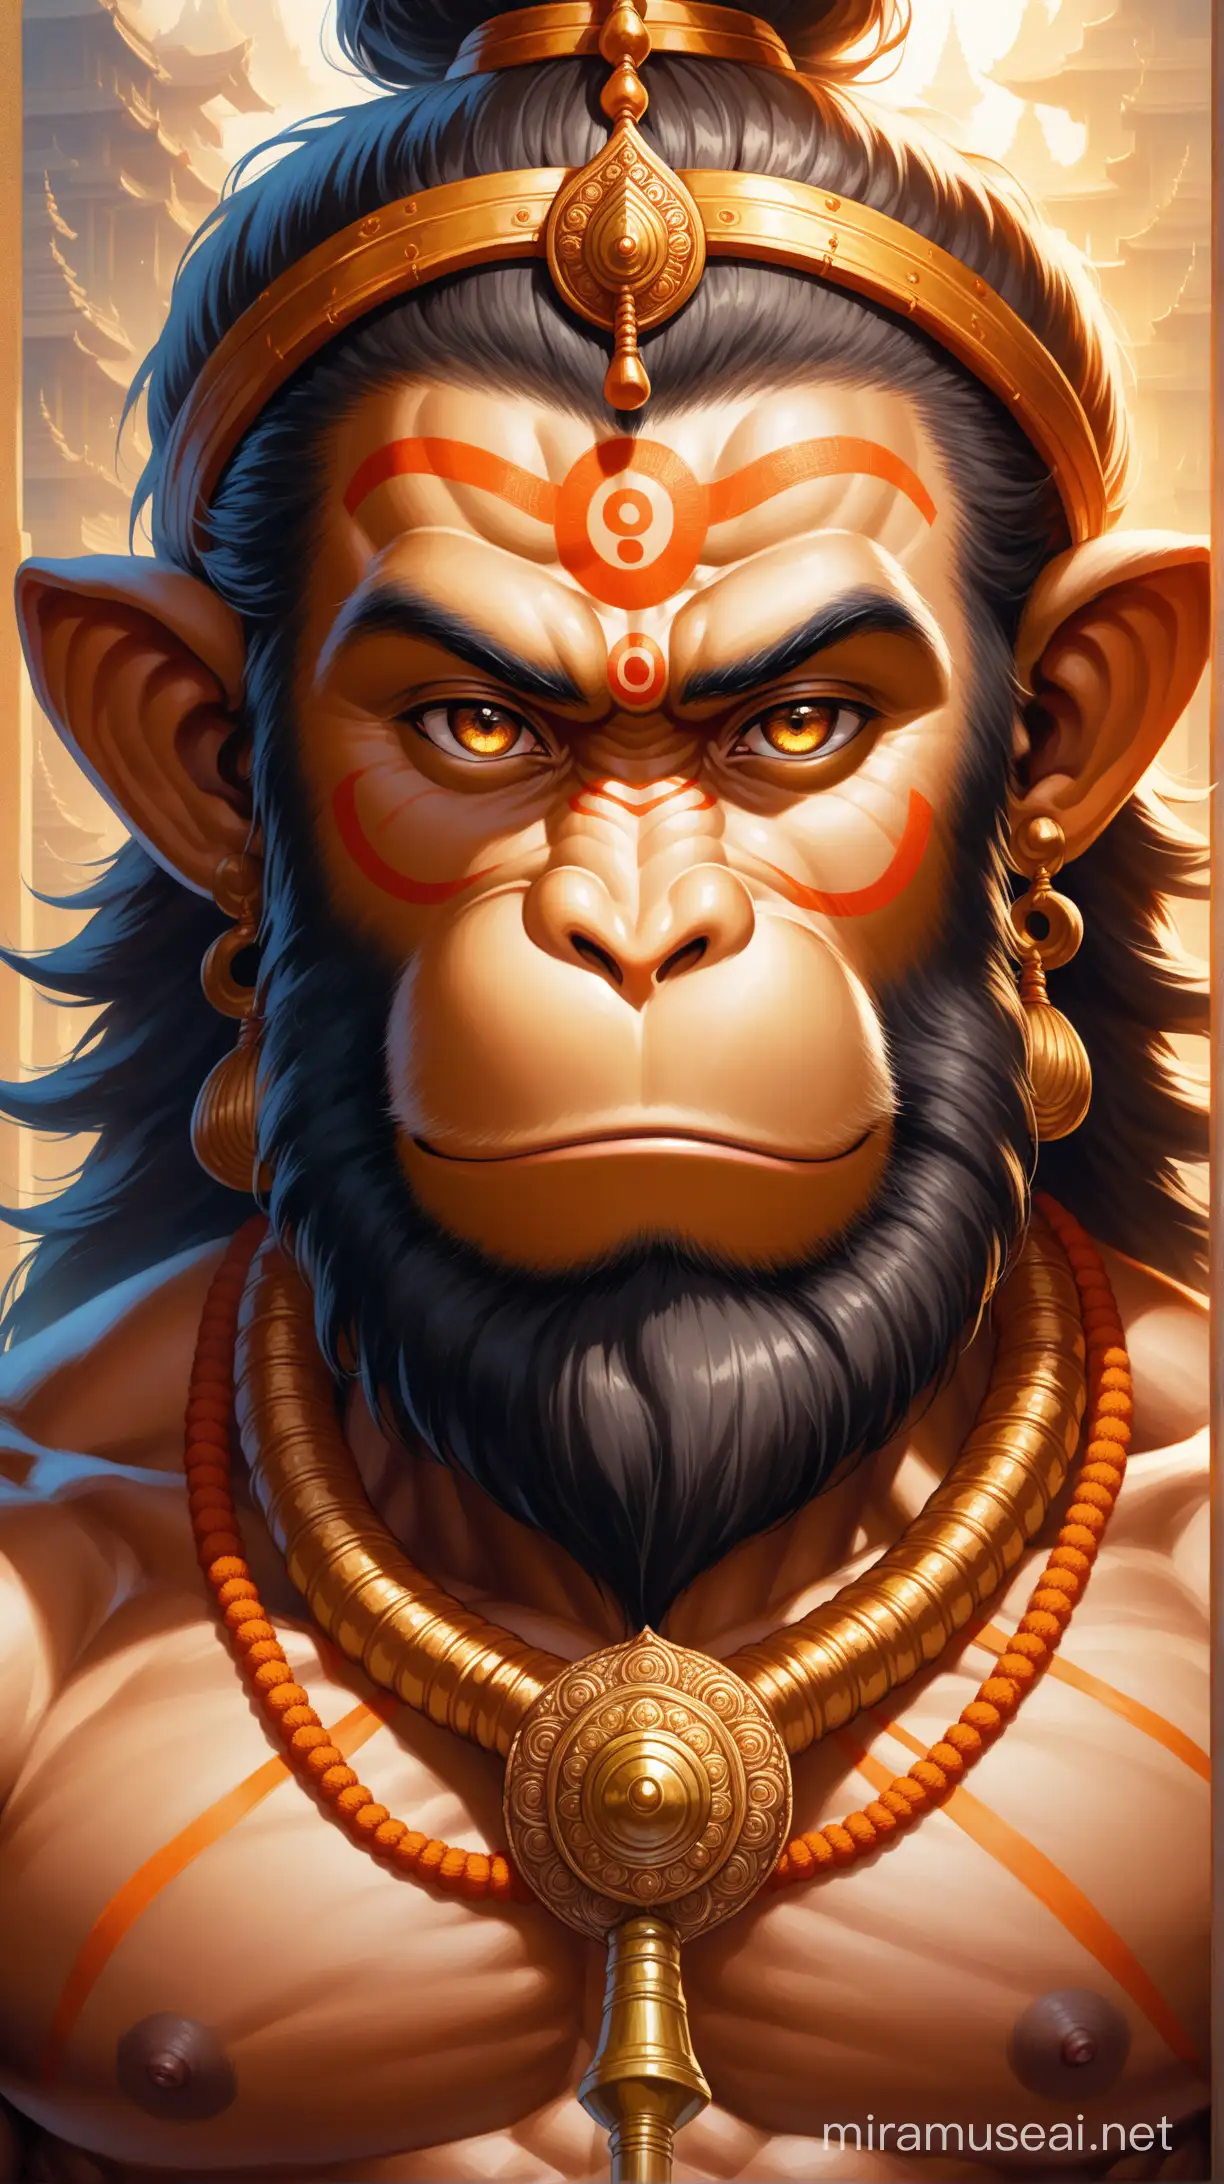 A striking, highly detailed, and realistic close-up portrait of Lord Hanuman, the divine monkey god. He has a strong, muscular face with a full beard and a gentle, wise expression. His eyes are open, revealing a deep sense of devotion and compassion. His hair is tousled, and his forehead is adorned with a sacred mark. He wears a traditional dhoti and is holding a mace in his right hand. The background is a soft, blurred, and subtle representation of a temple, adding a sense of spirituality to the image. Front face